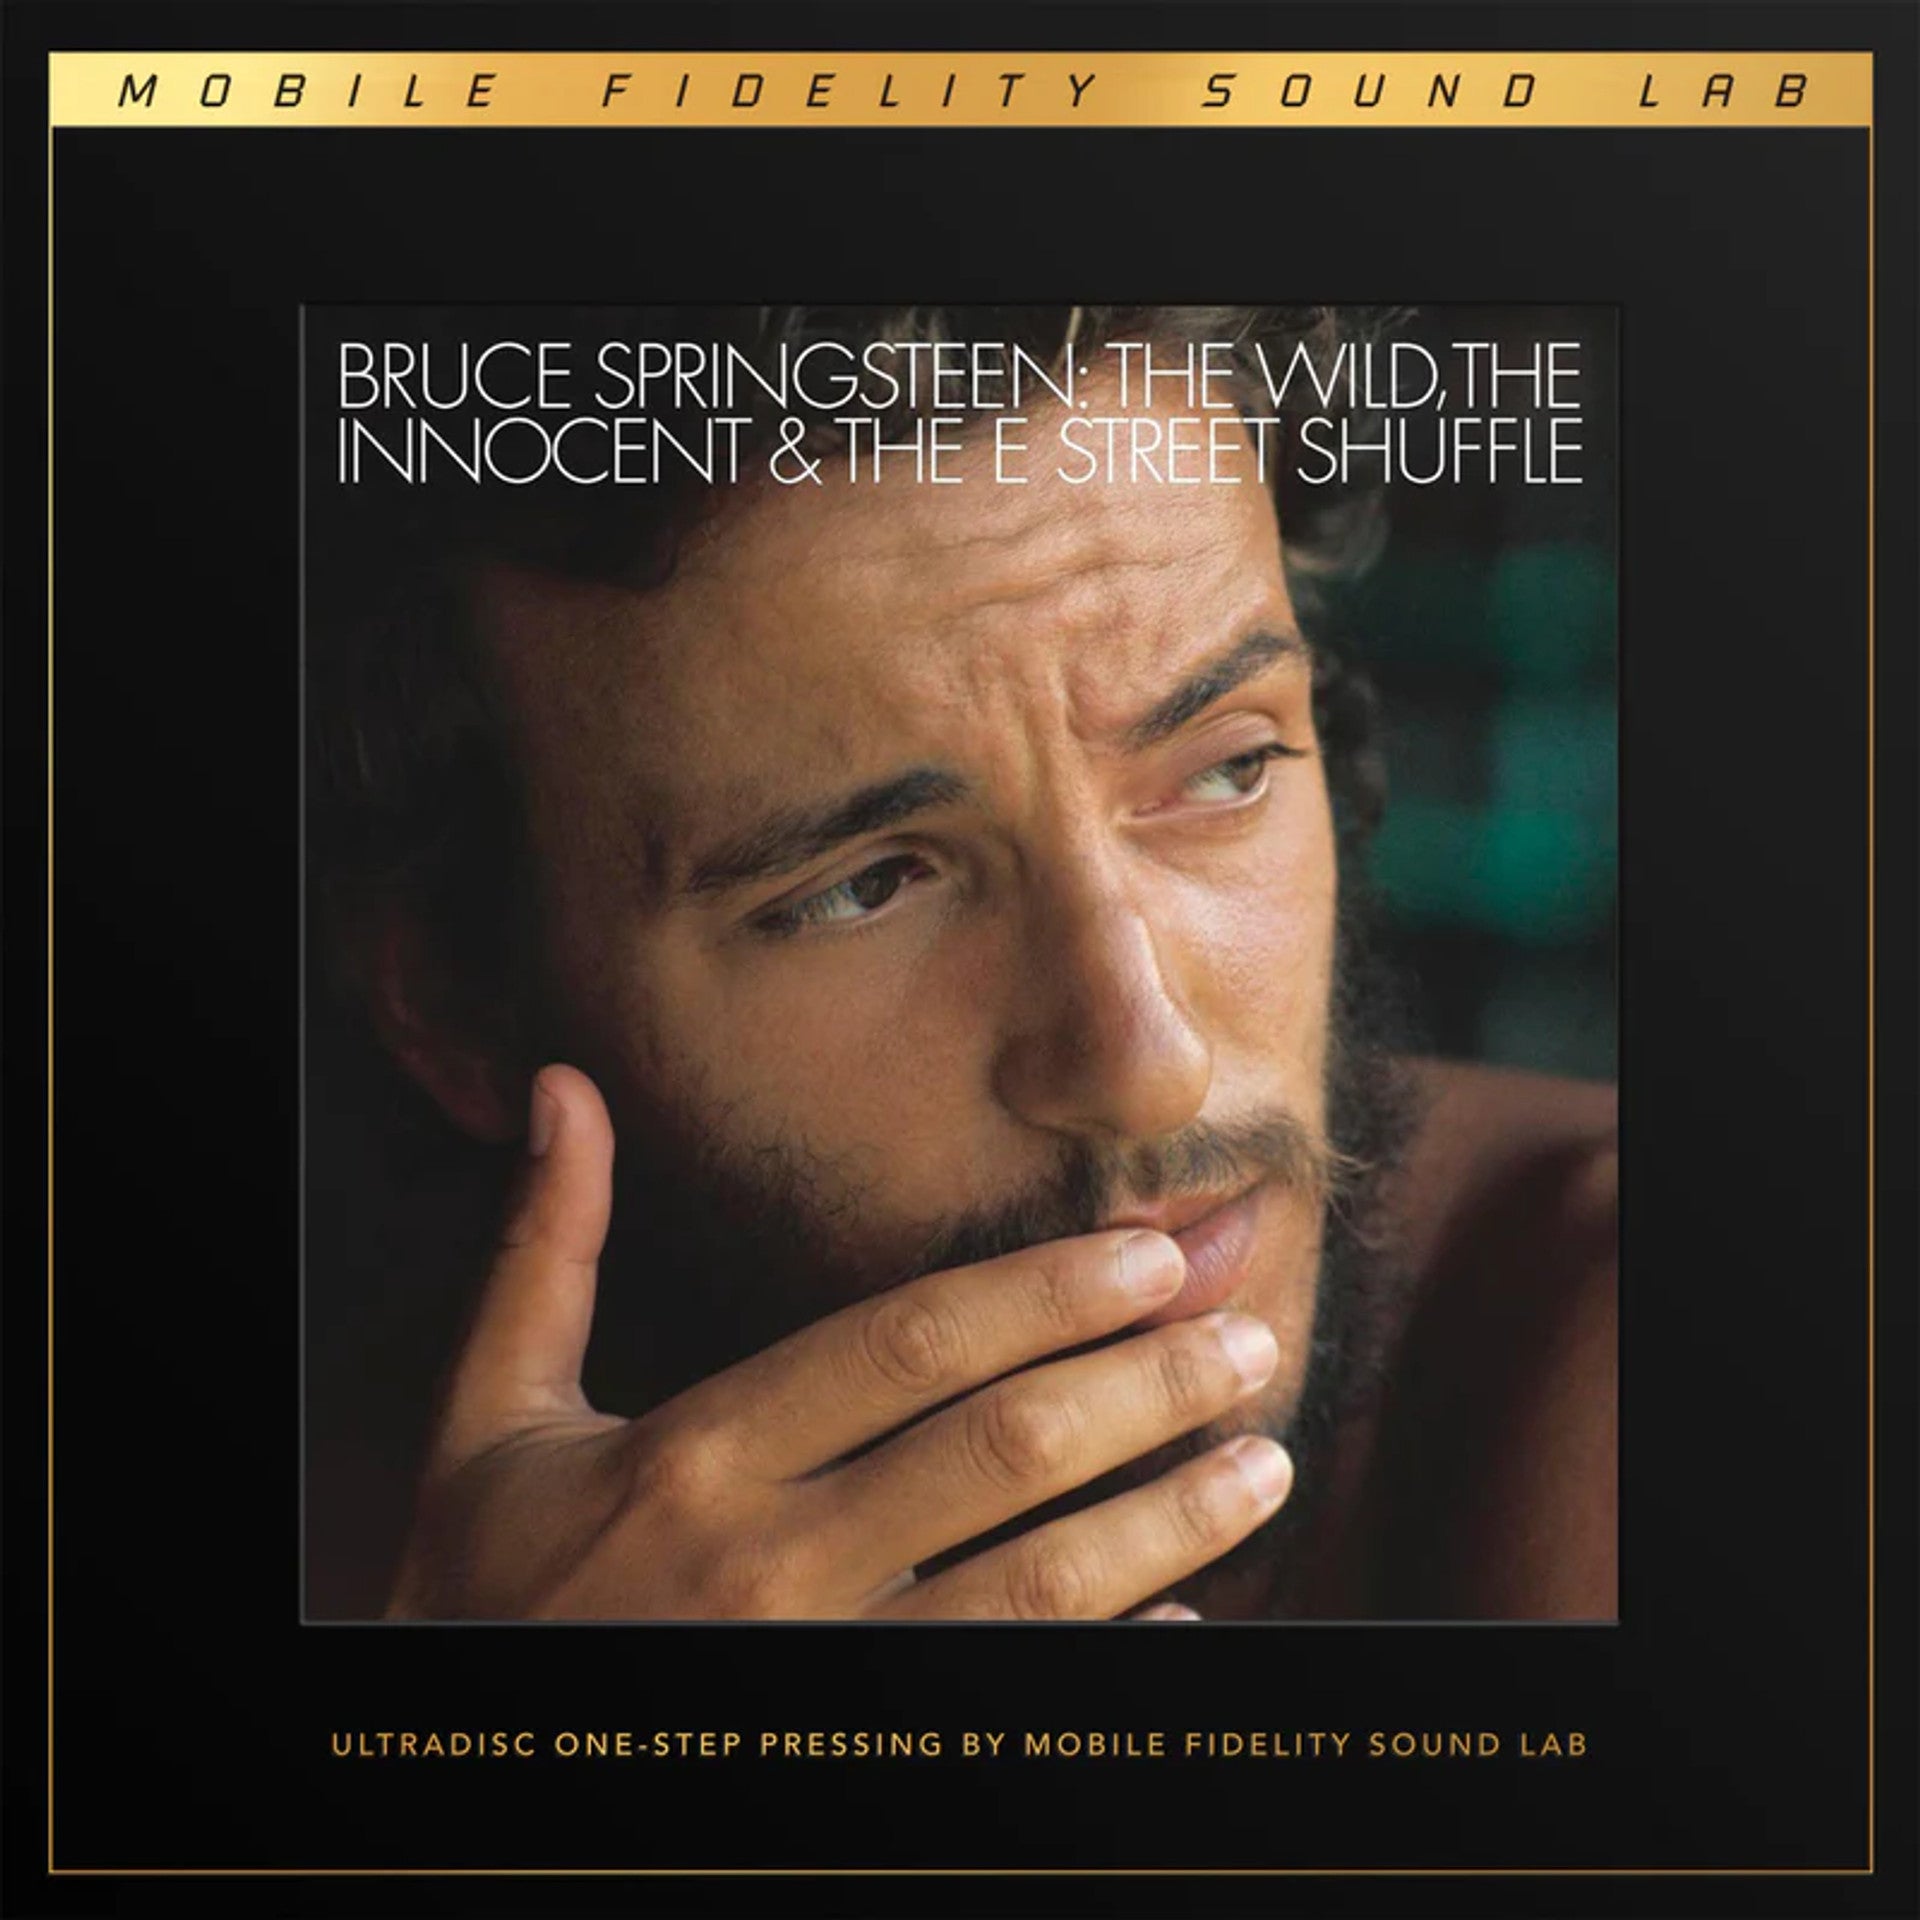 Bruce Springsteen - Wild, Innocent, and E Street Shuffle [Limited Edition UltraDisc One-Step 33.3rpm Vinyl LP Set]